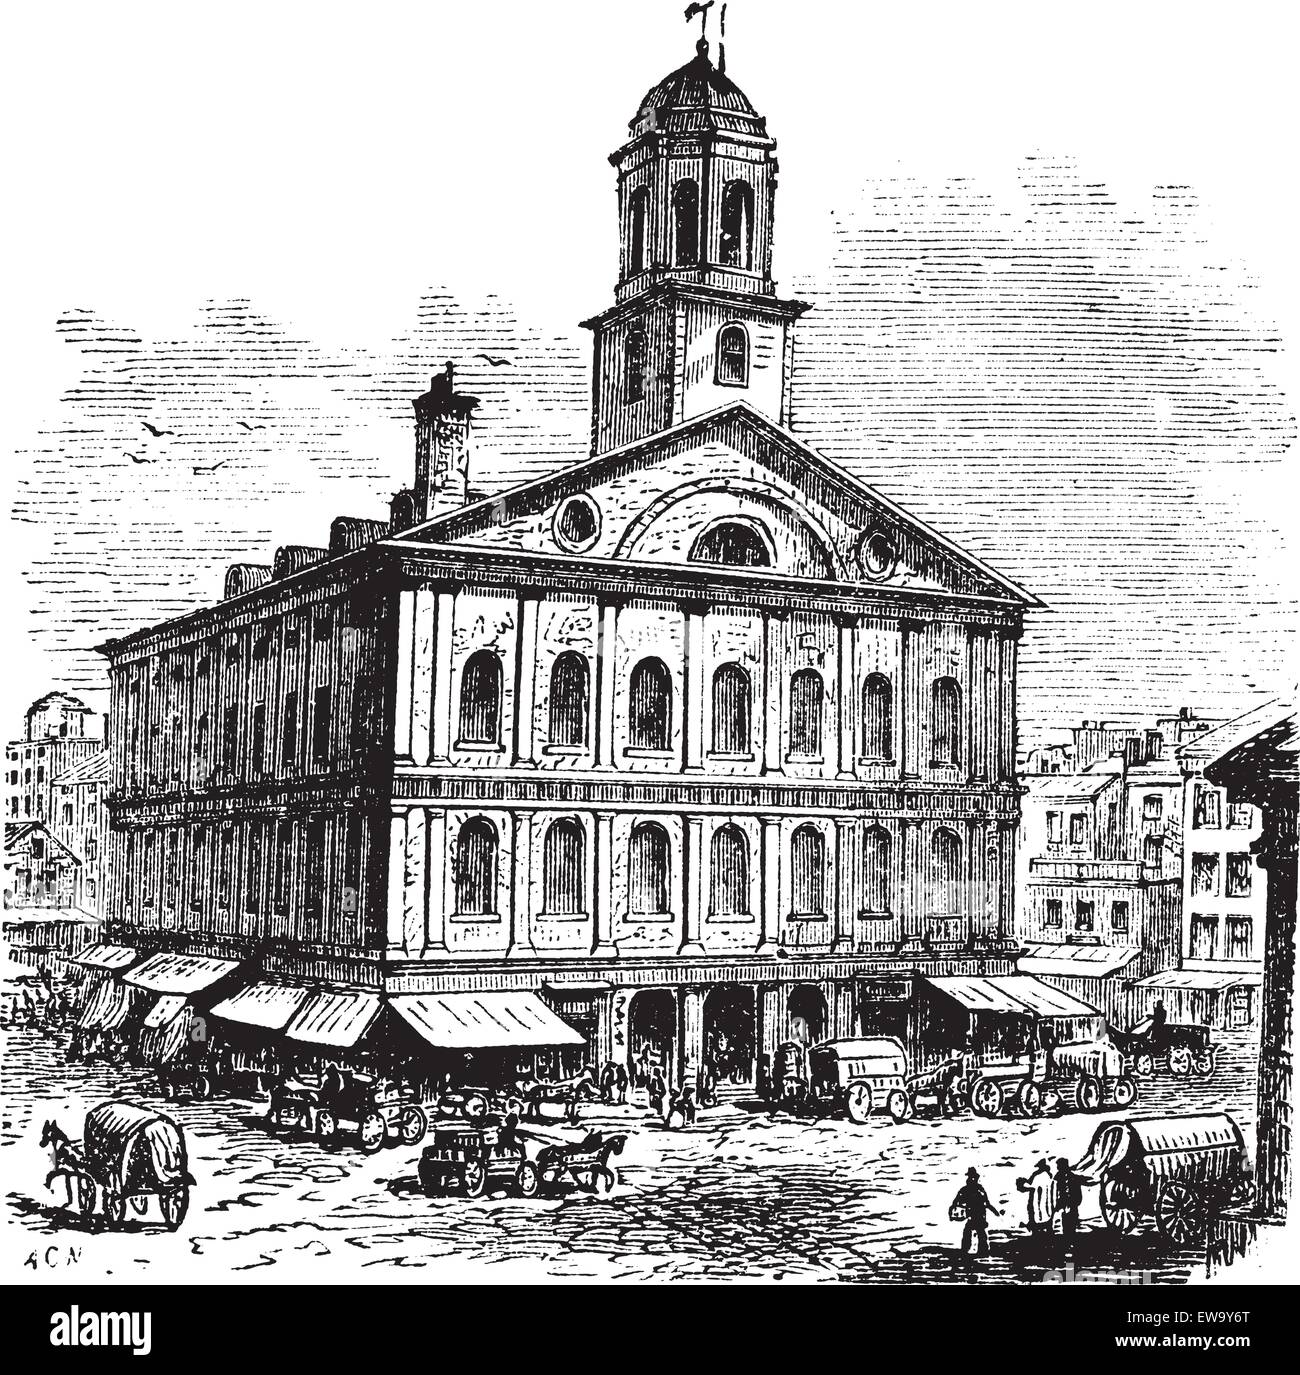 Faneuil Hall or The Cradle of Liberty, Boston, Massachusetts, USA vintage engraving.  Old engraved illustration of building exterior Stock Vector